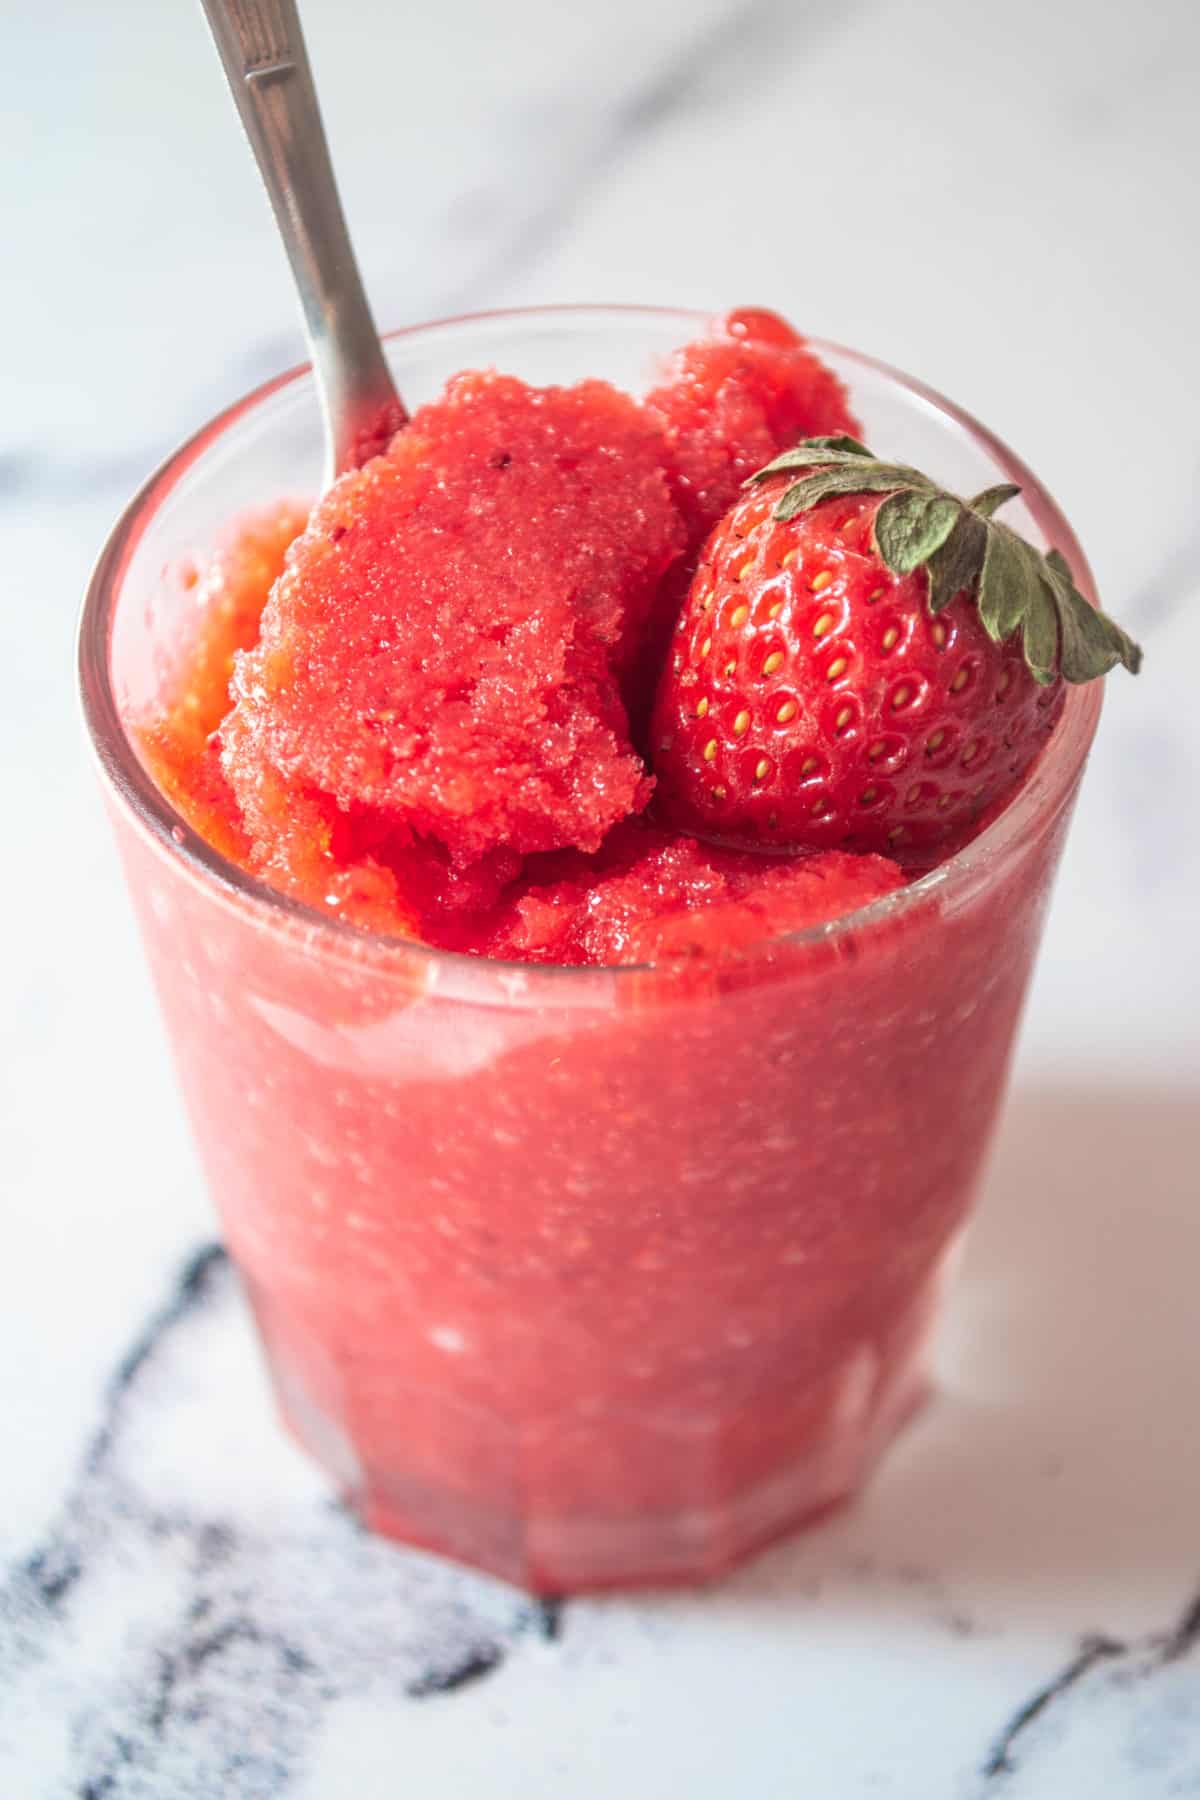 Granita in a glass topped with a strawberry.